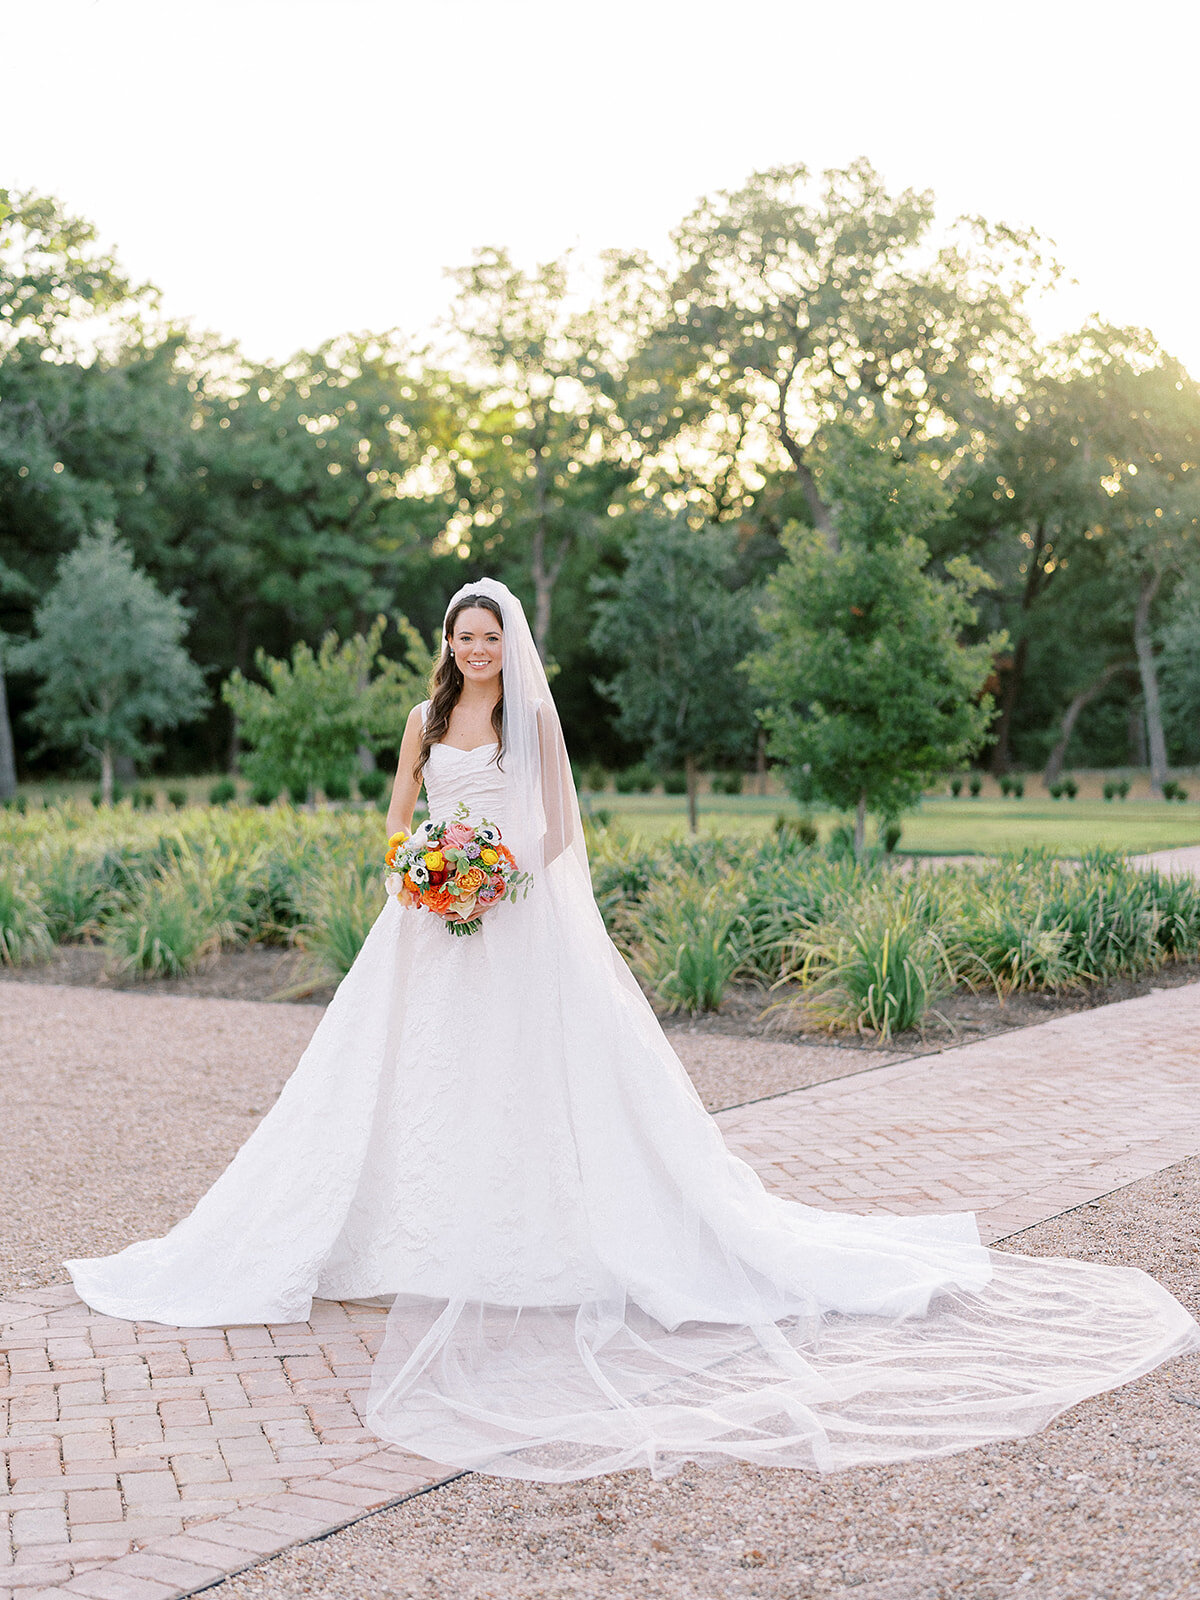 A classic bridal portrait in the gardens of The Grand Lady, one of Austin's best wedding venues